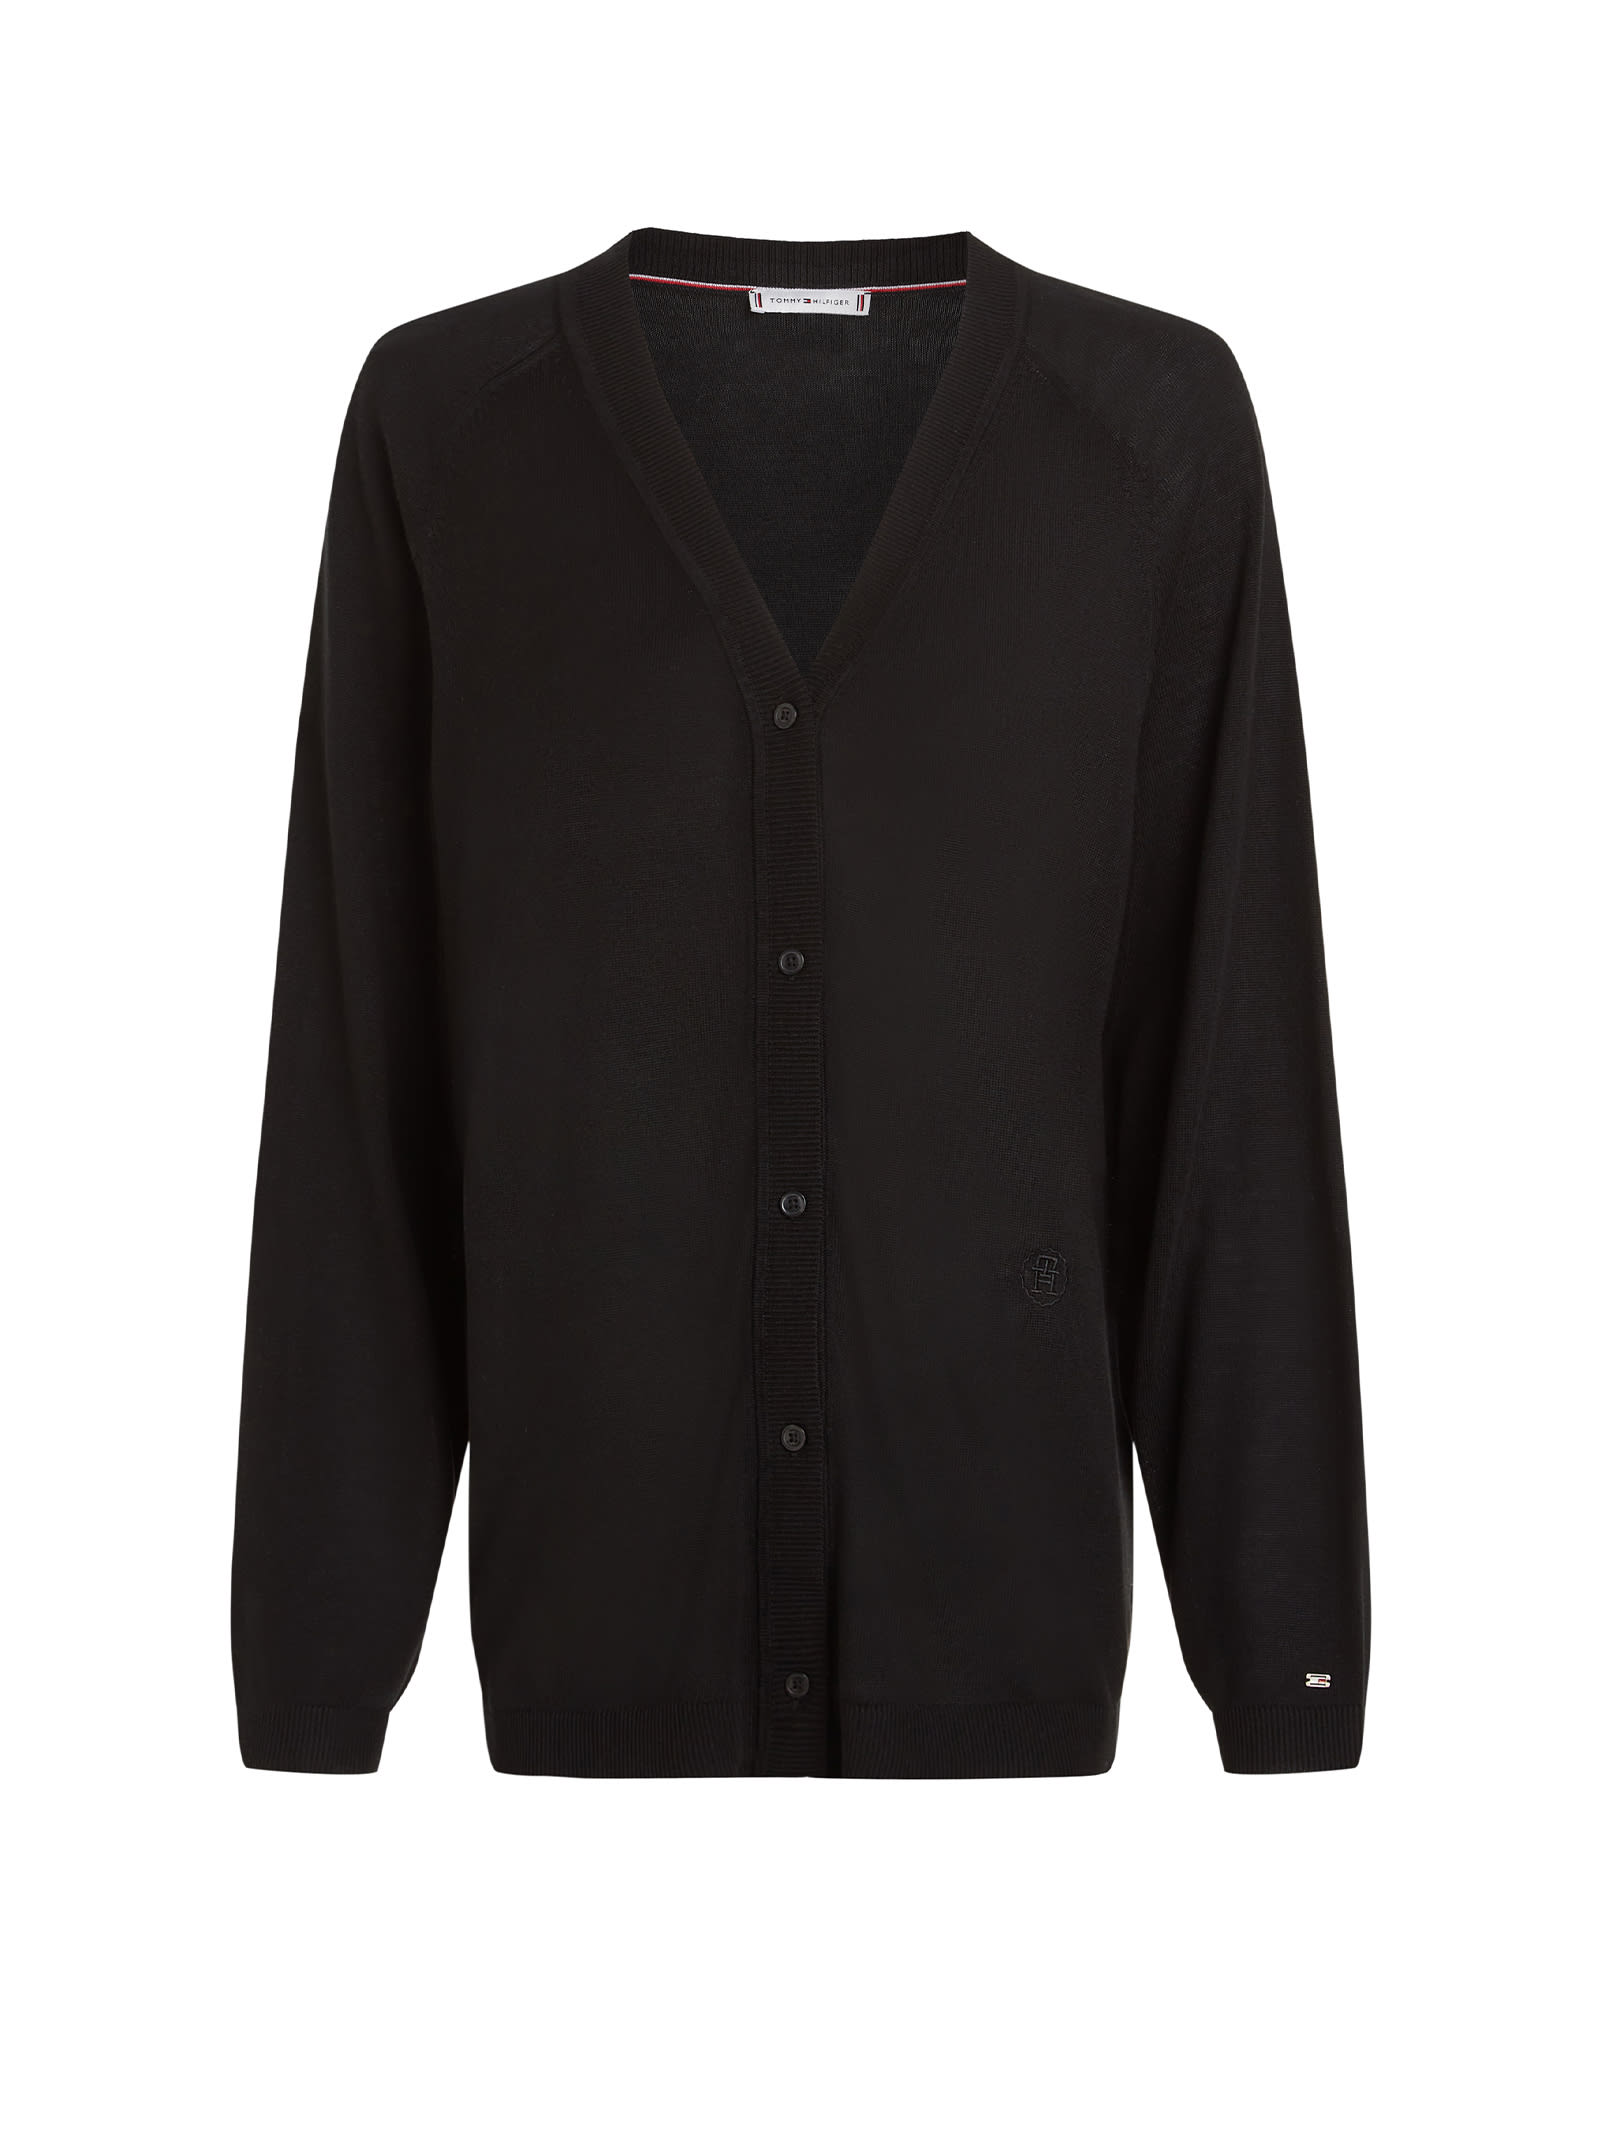 Black Cardigan With Buttons